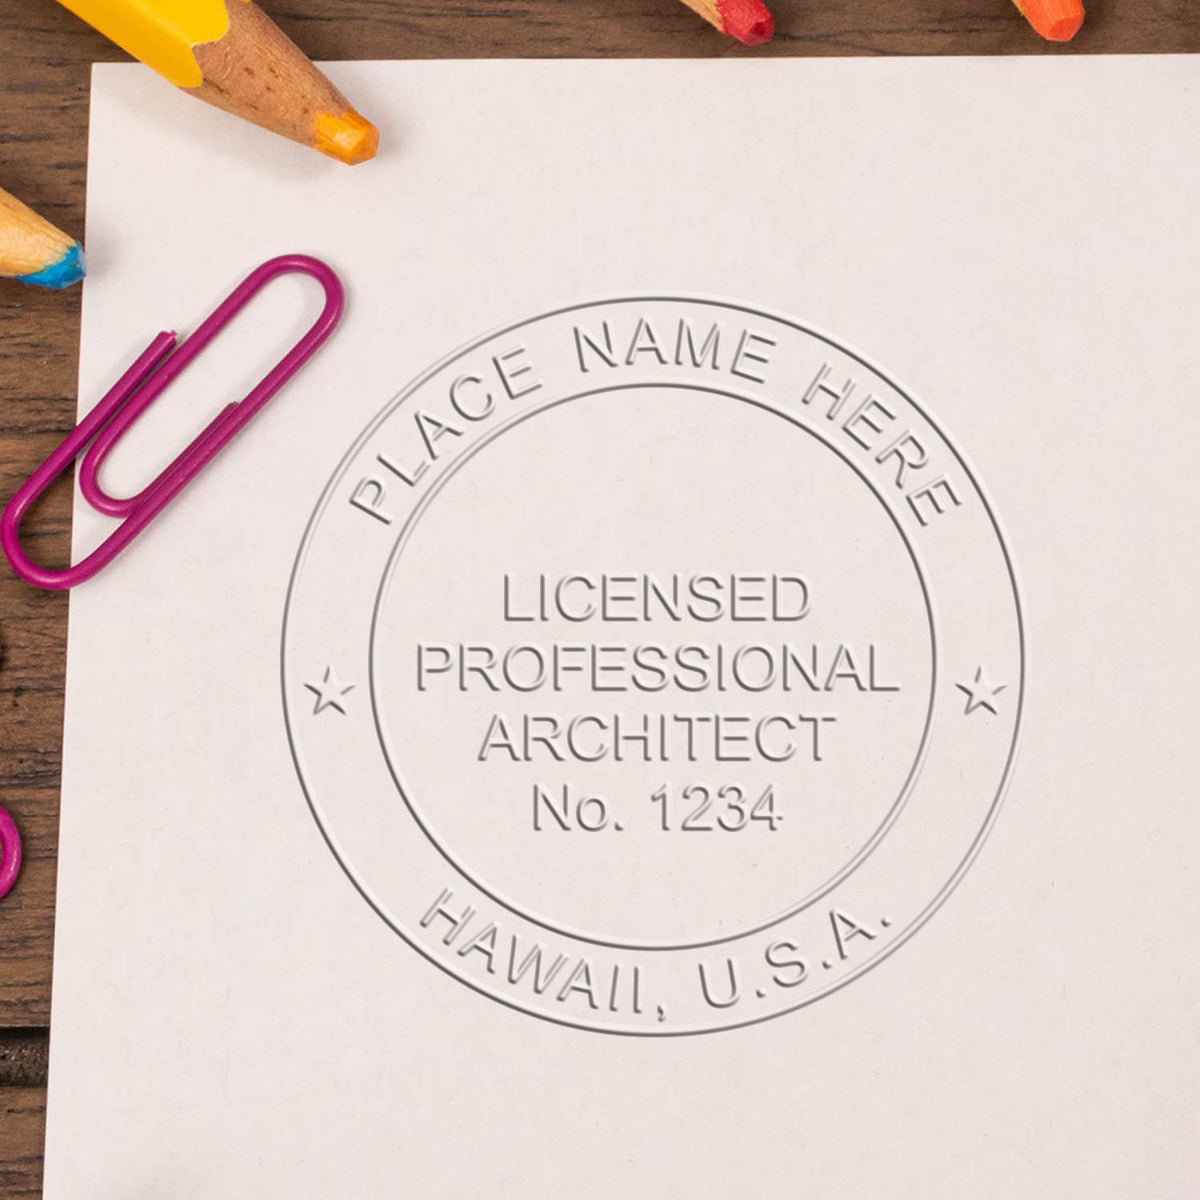 The State of Hawaii Long Reach Architectural Embossing Seal stamp impression comes to life with a crisp, detailed photo on paper - showcasing true professional quality.